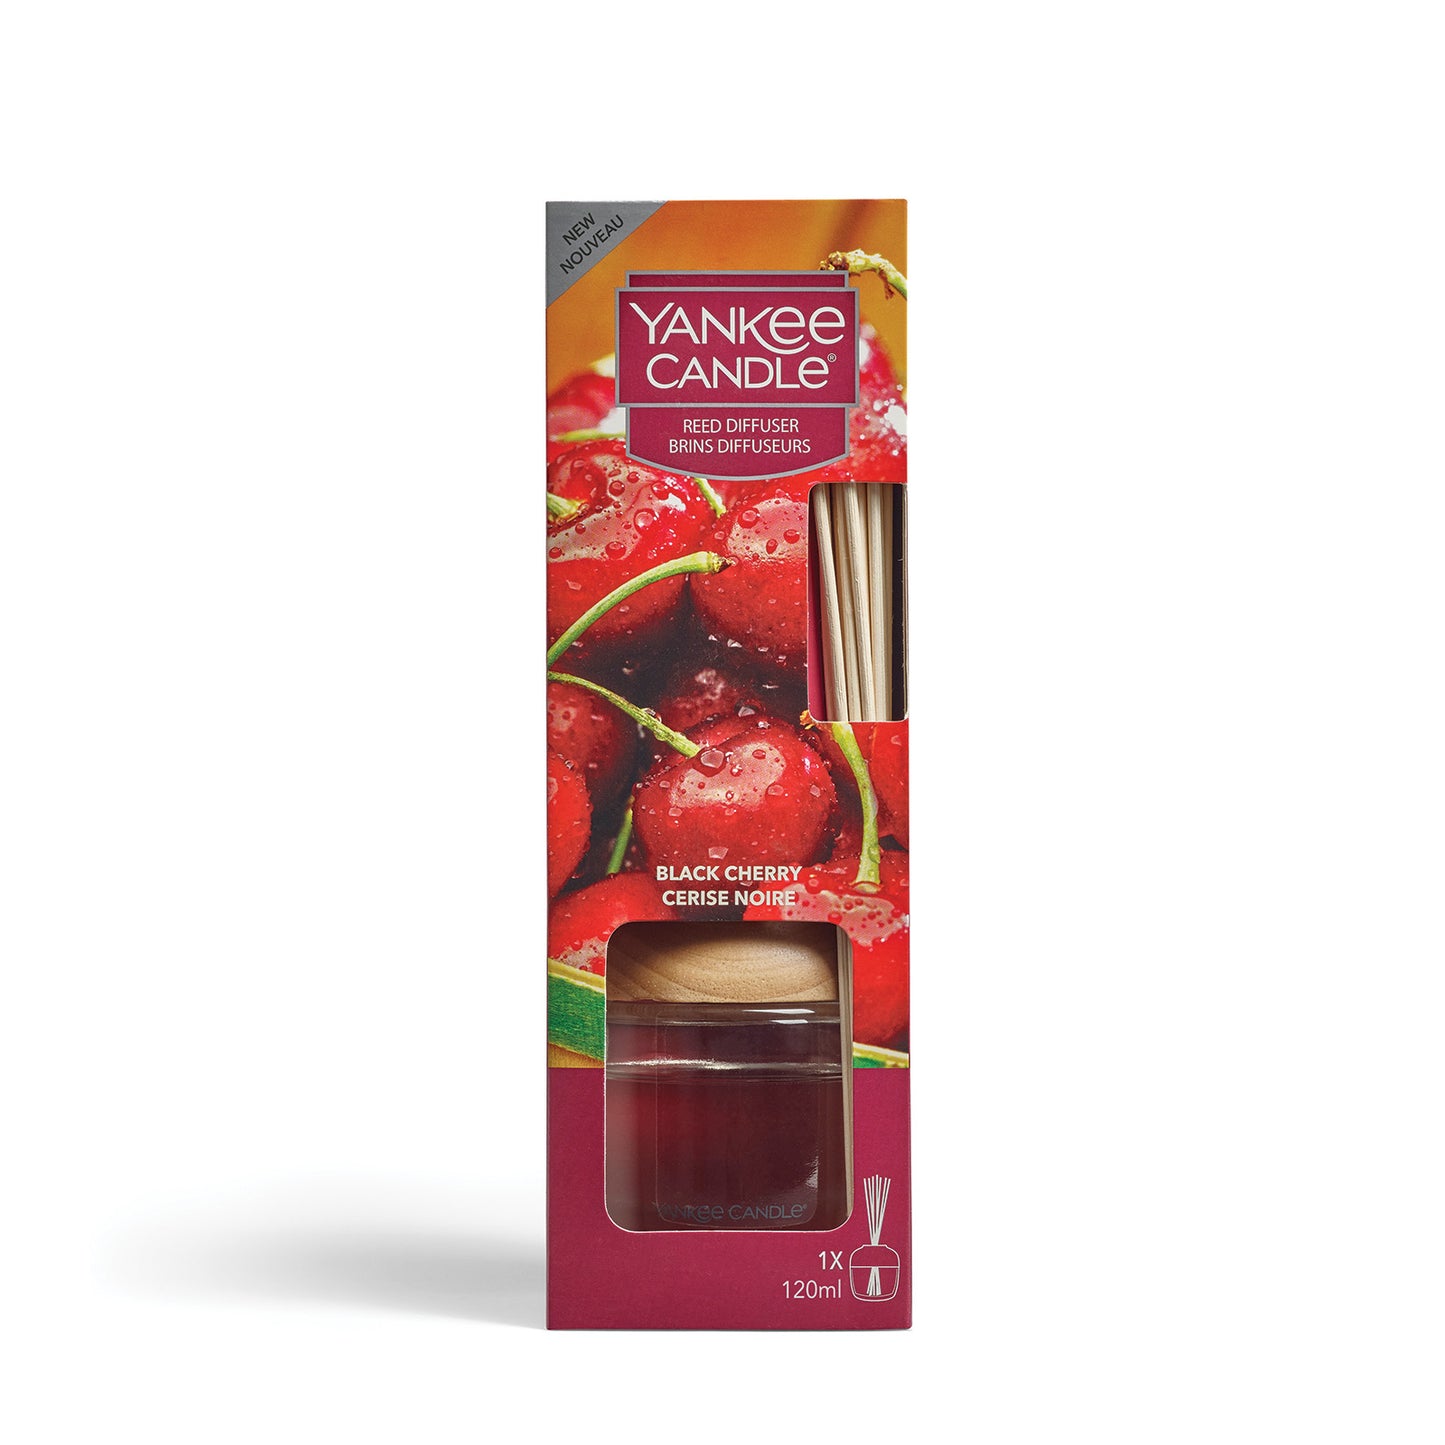 Yankee Candle Black Cherry 120ml Reed Diffuser